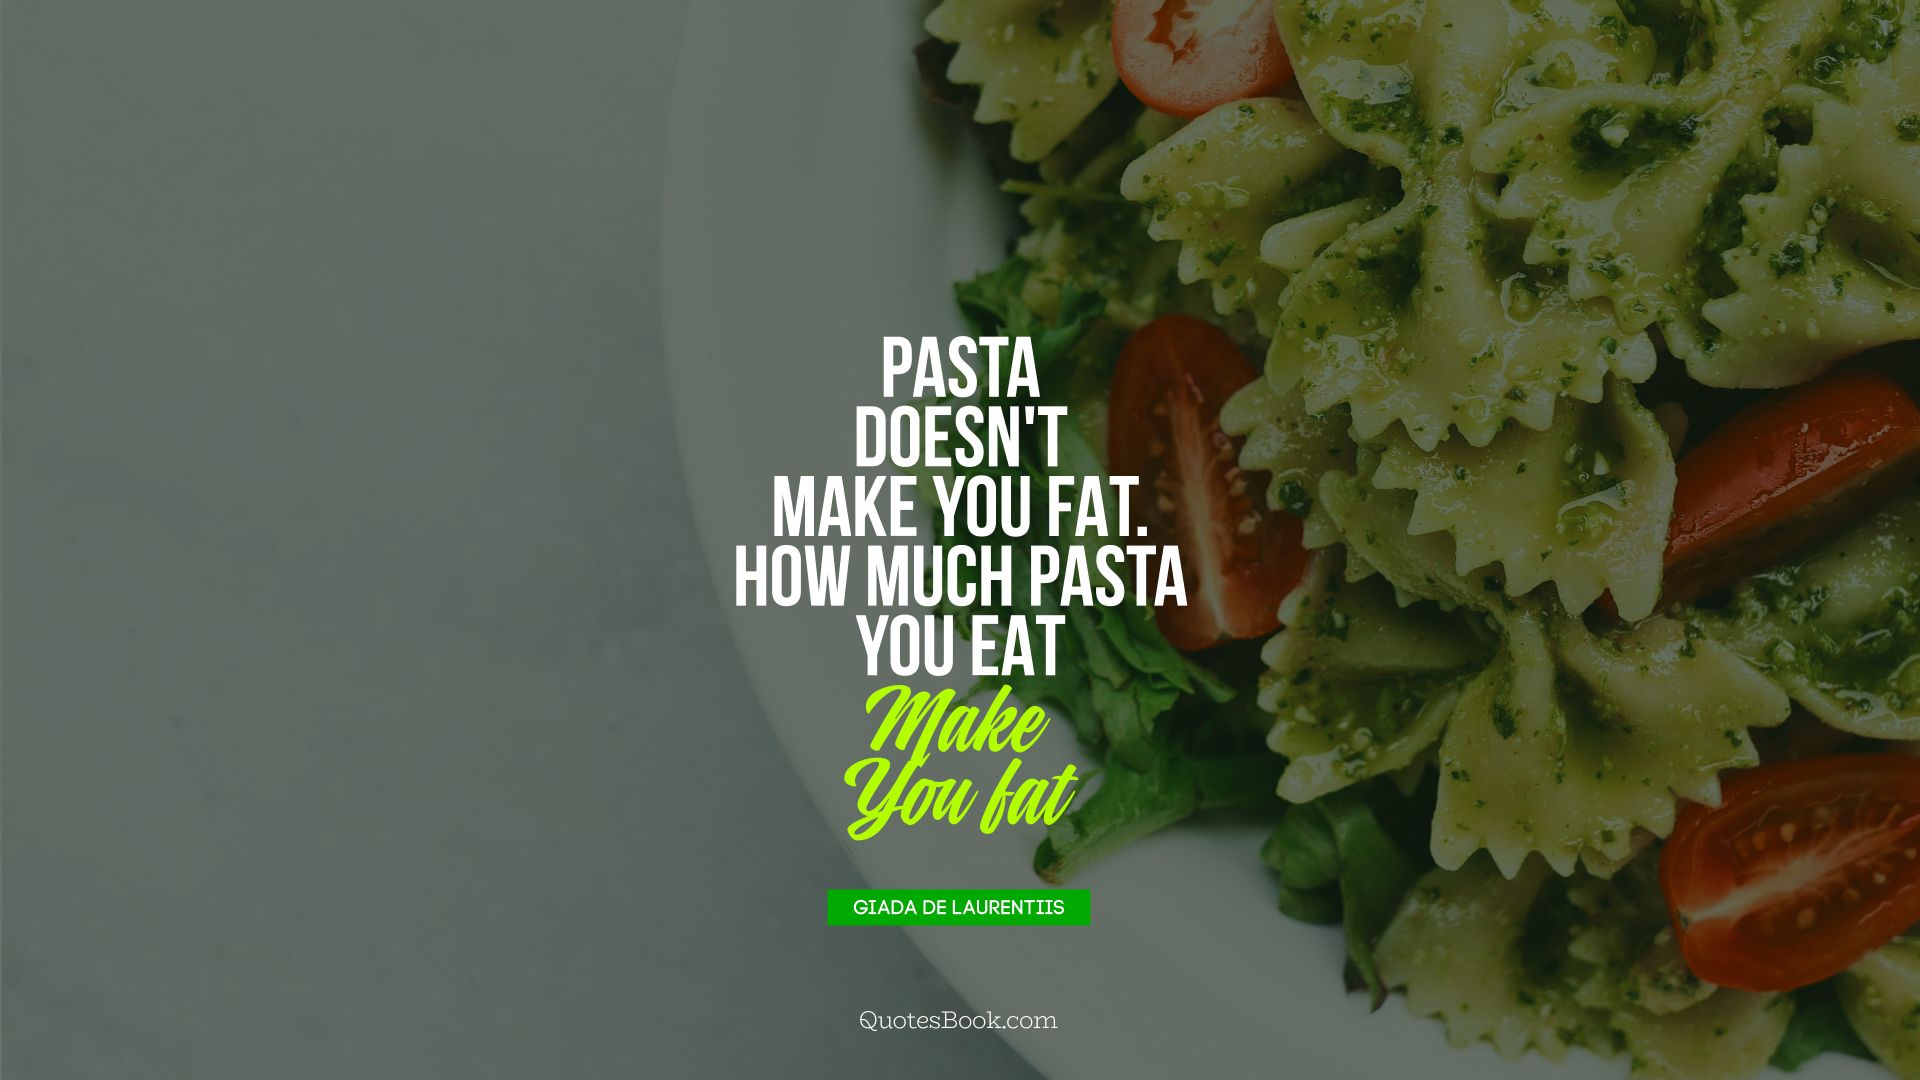 Pasta doesn't make you fat. How much pasta you eat makes you fat. - Quote by Giada De Laurentiis